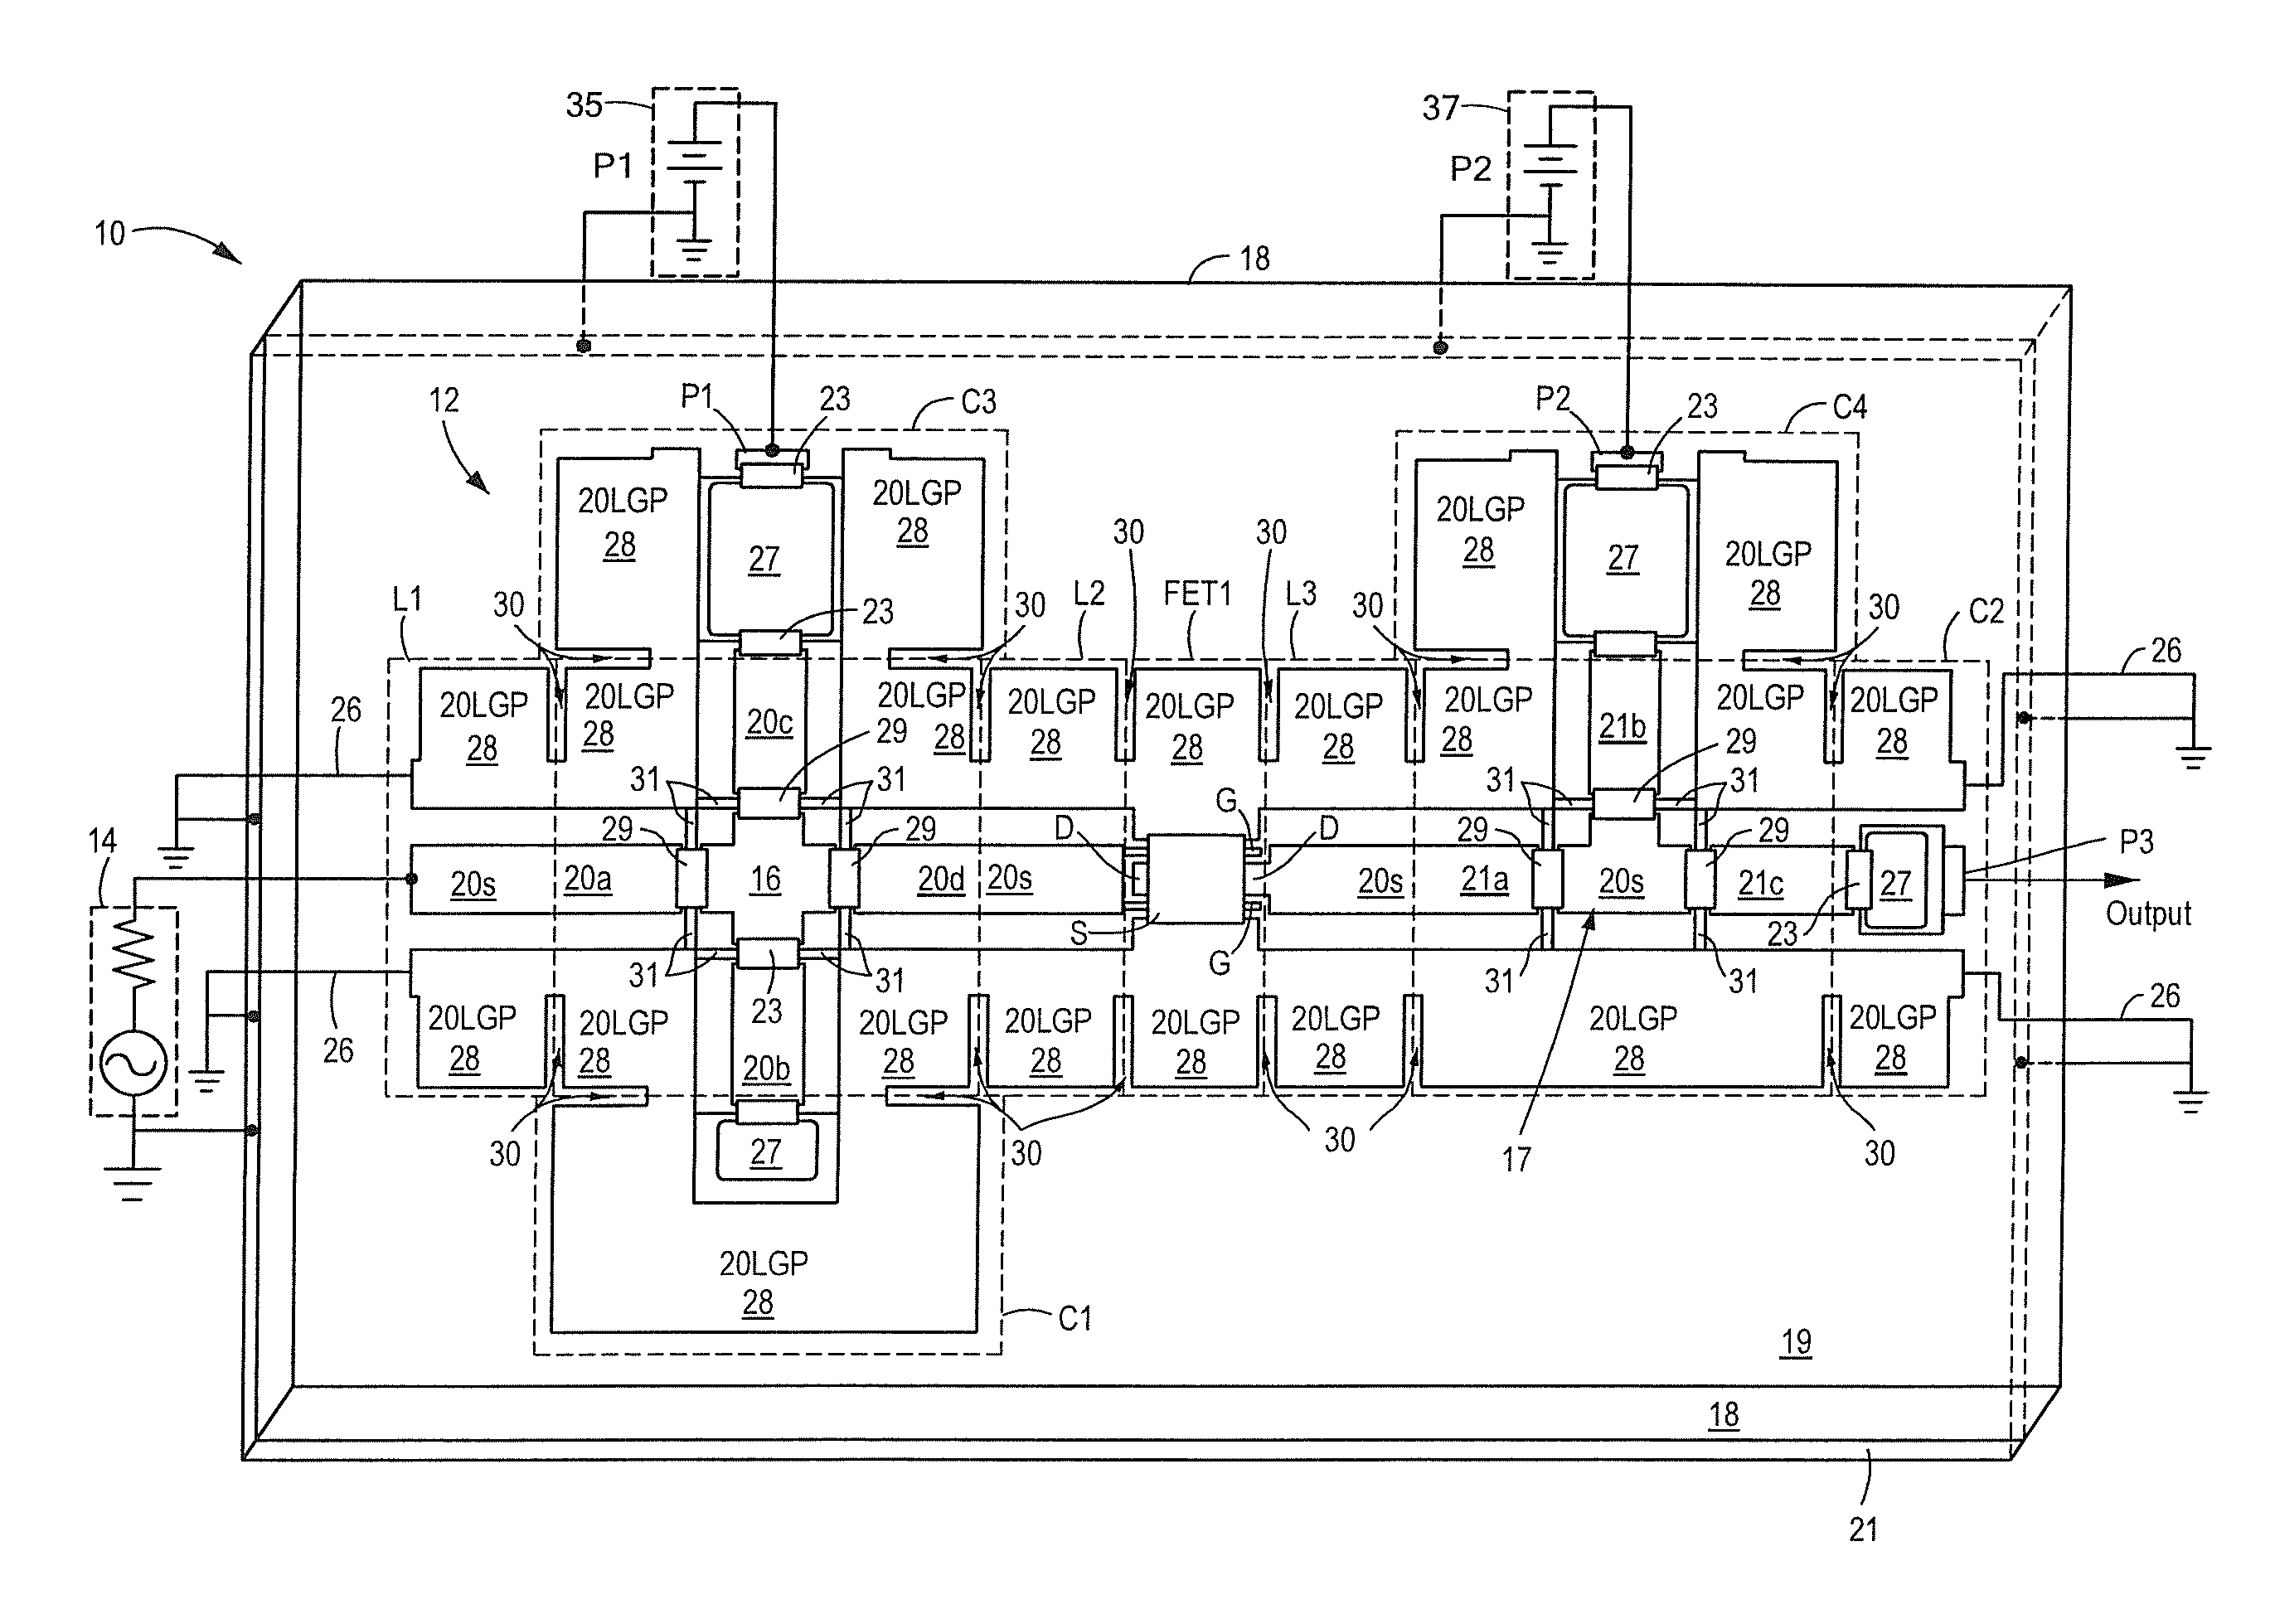 Monolithic microwave integrated circuits (MMICs) having conductor-backed coplanar waveguides and method of designing such MMICs